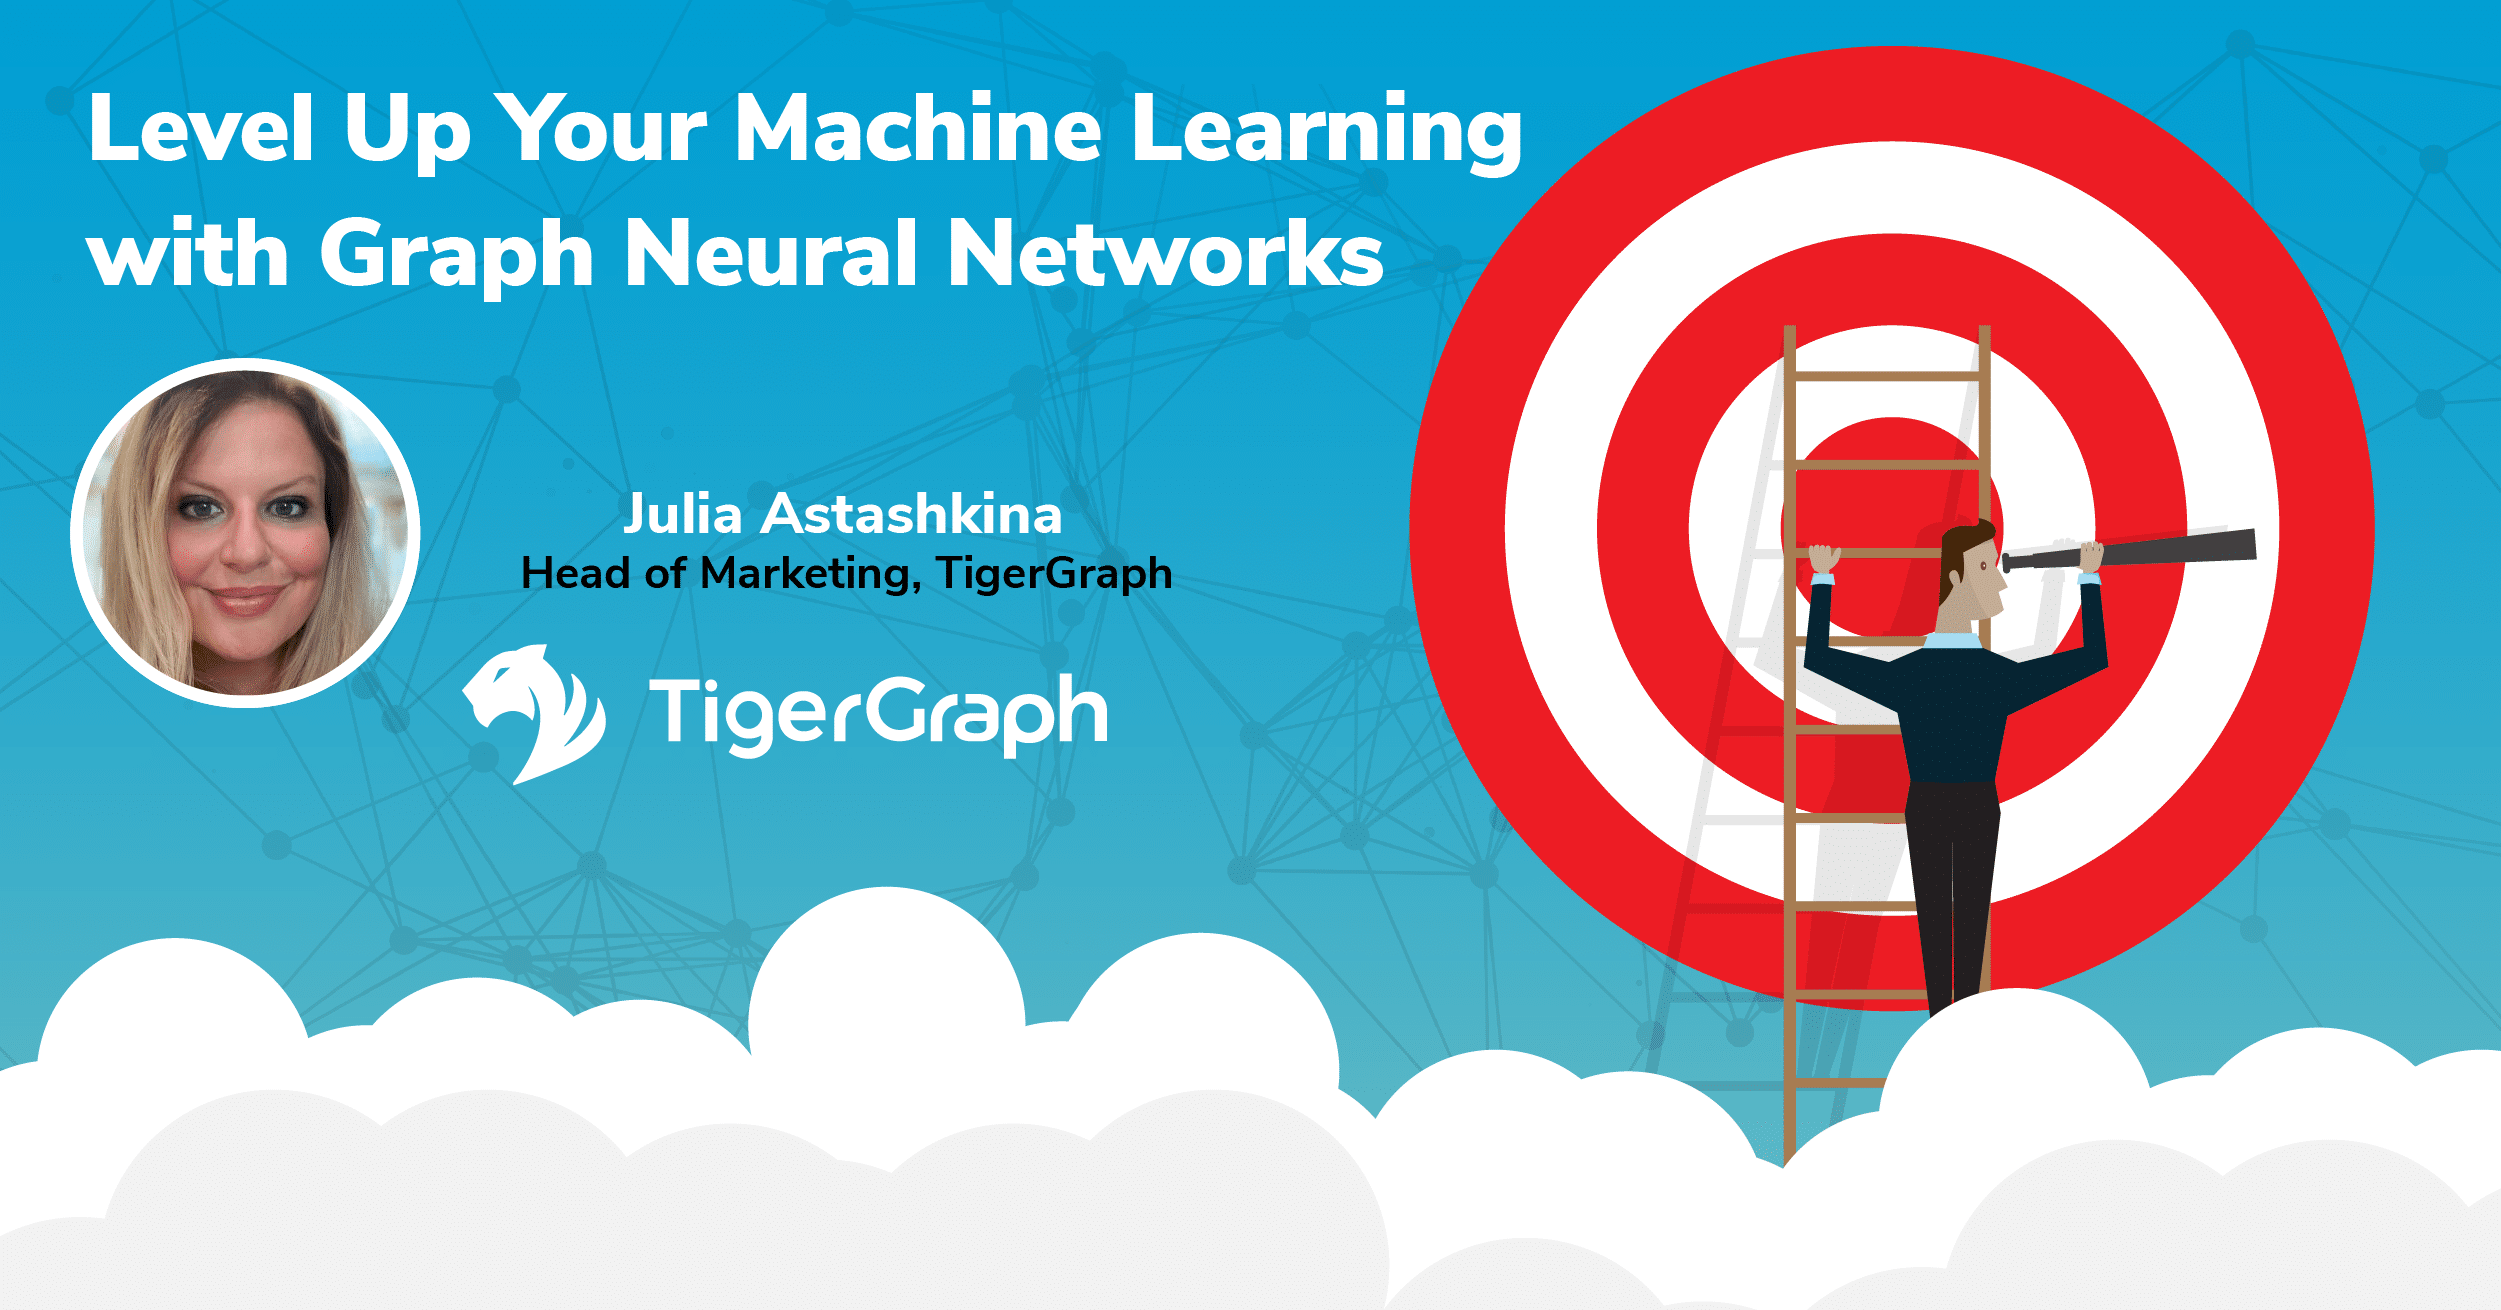 TigerGraph Puts State-of-the-Art Graph Neural Networks within Reach